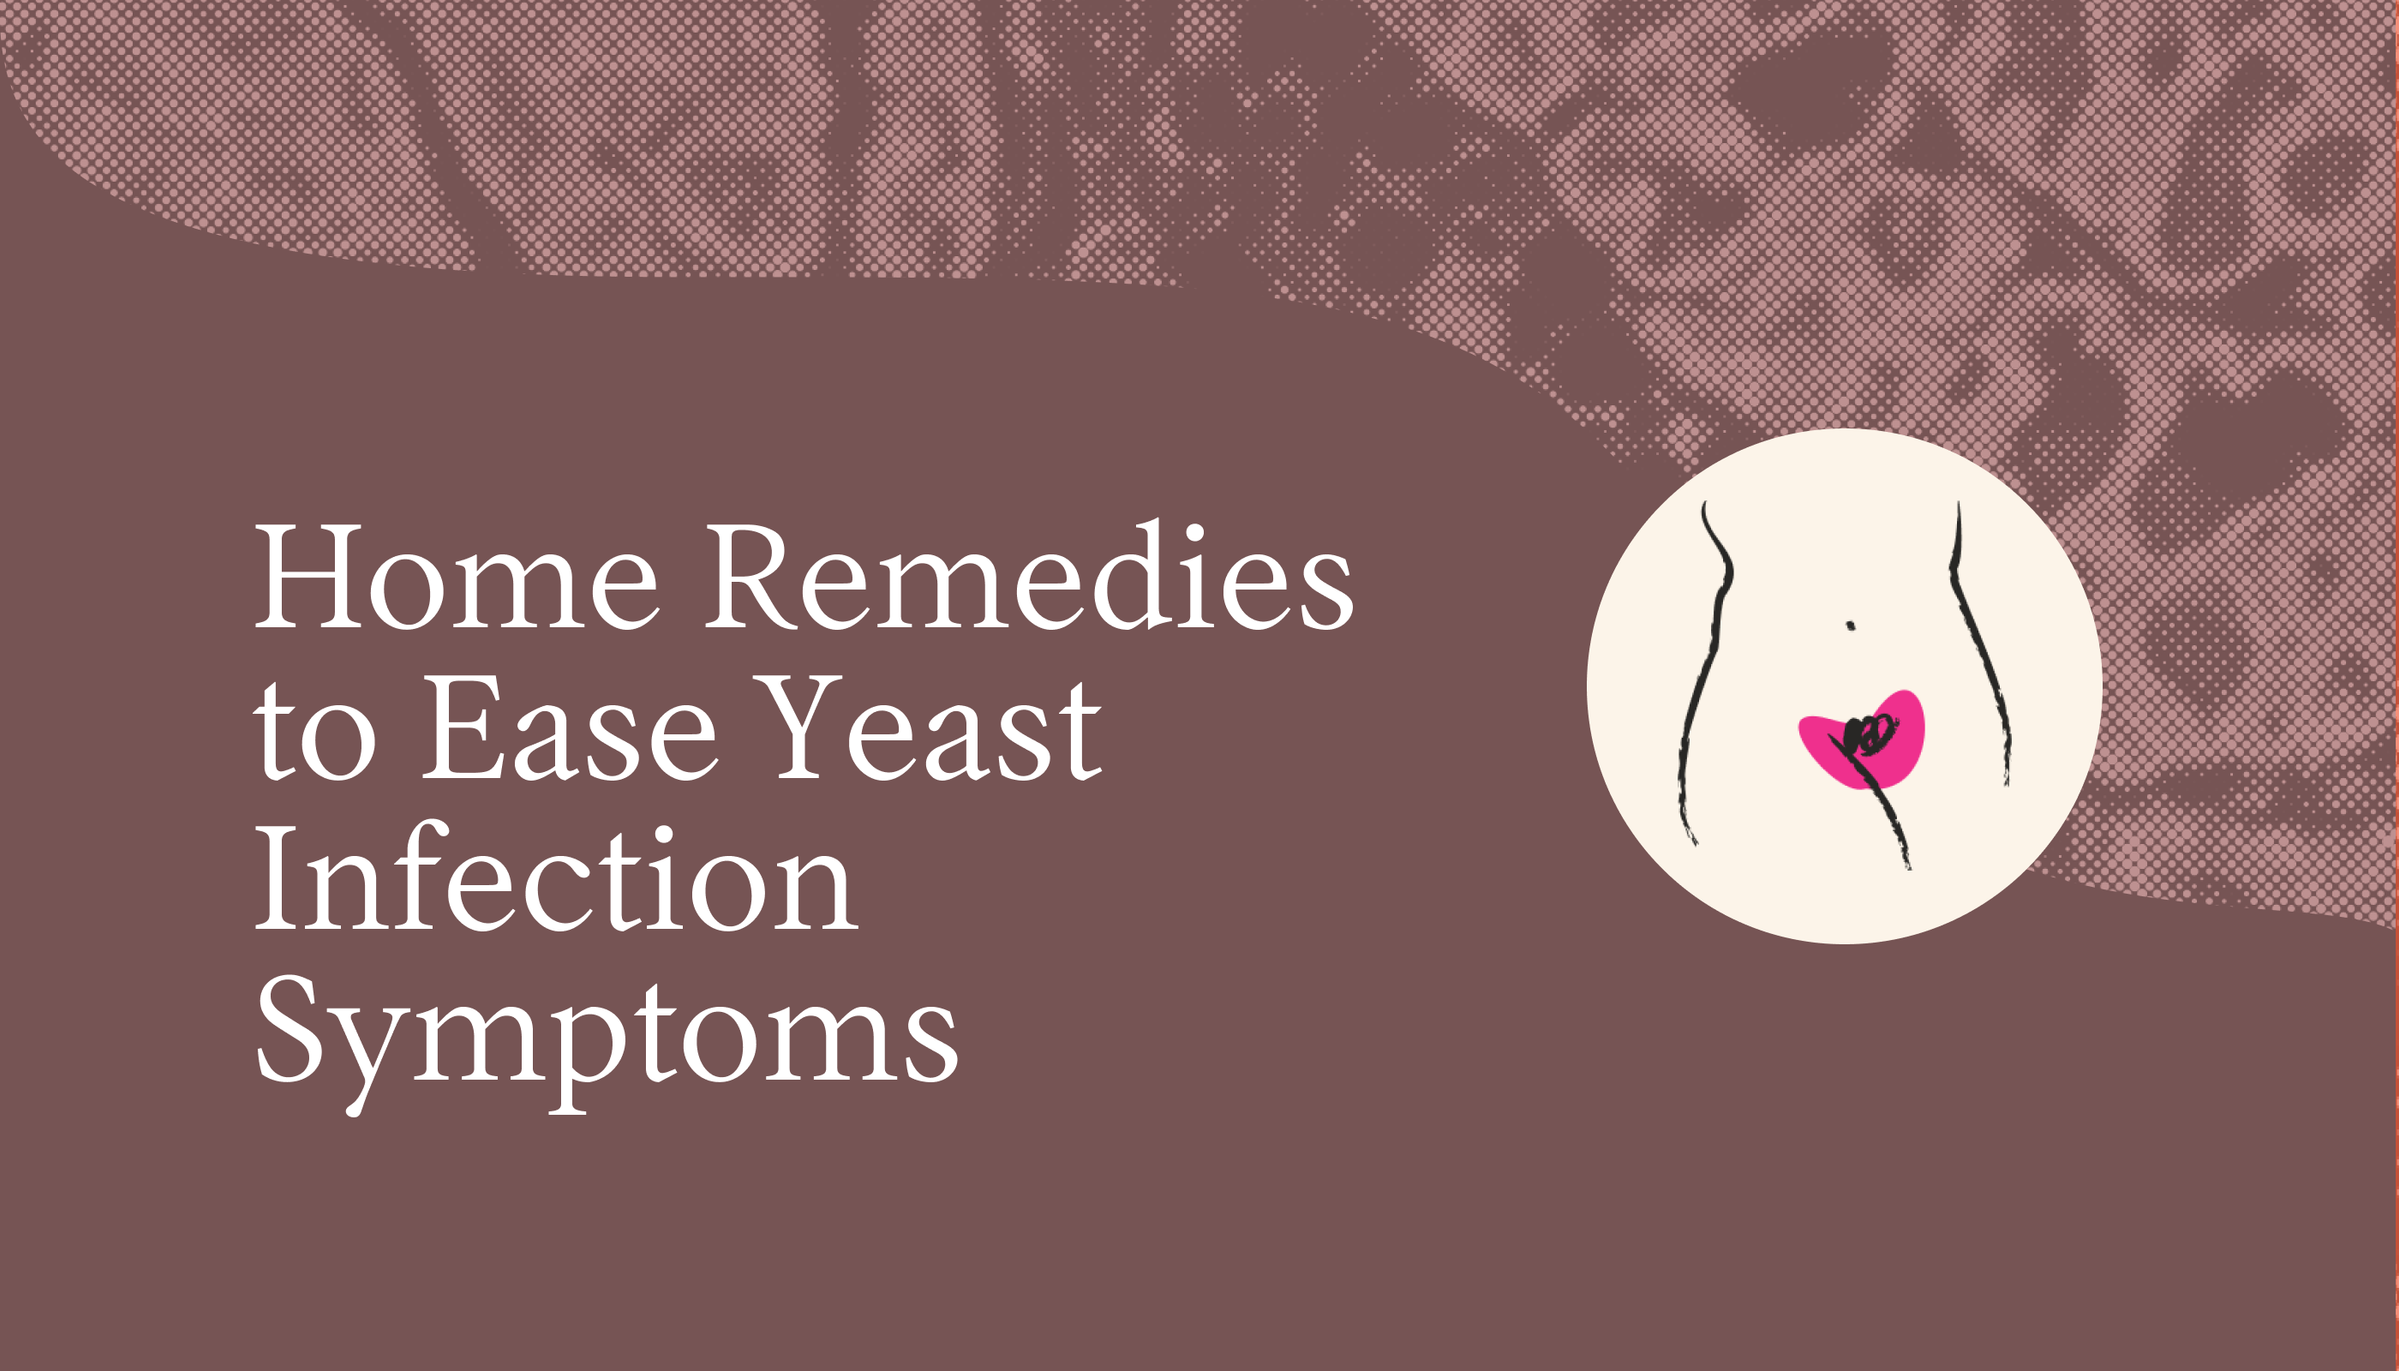 Home Remedies to Ease Yeast Infection Symptoms